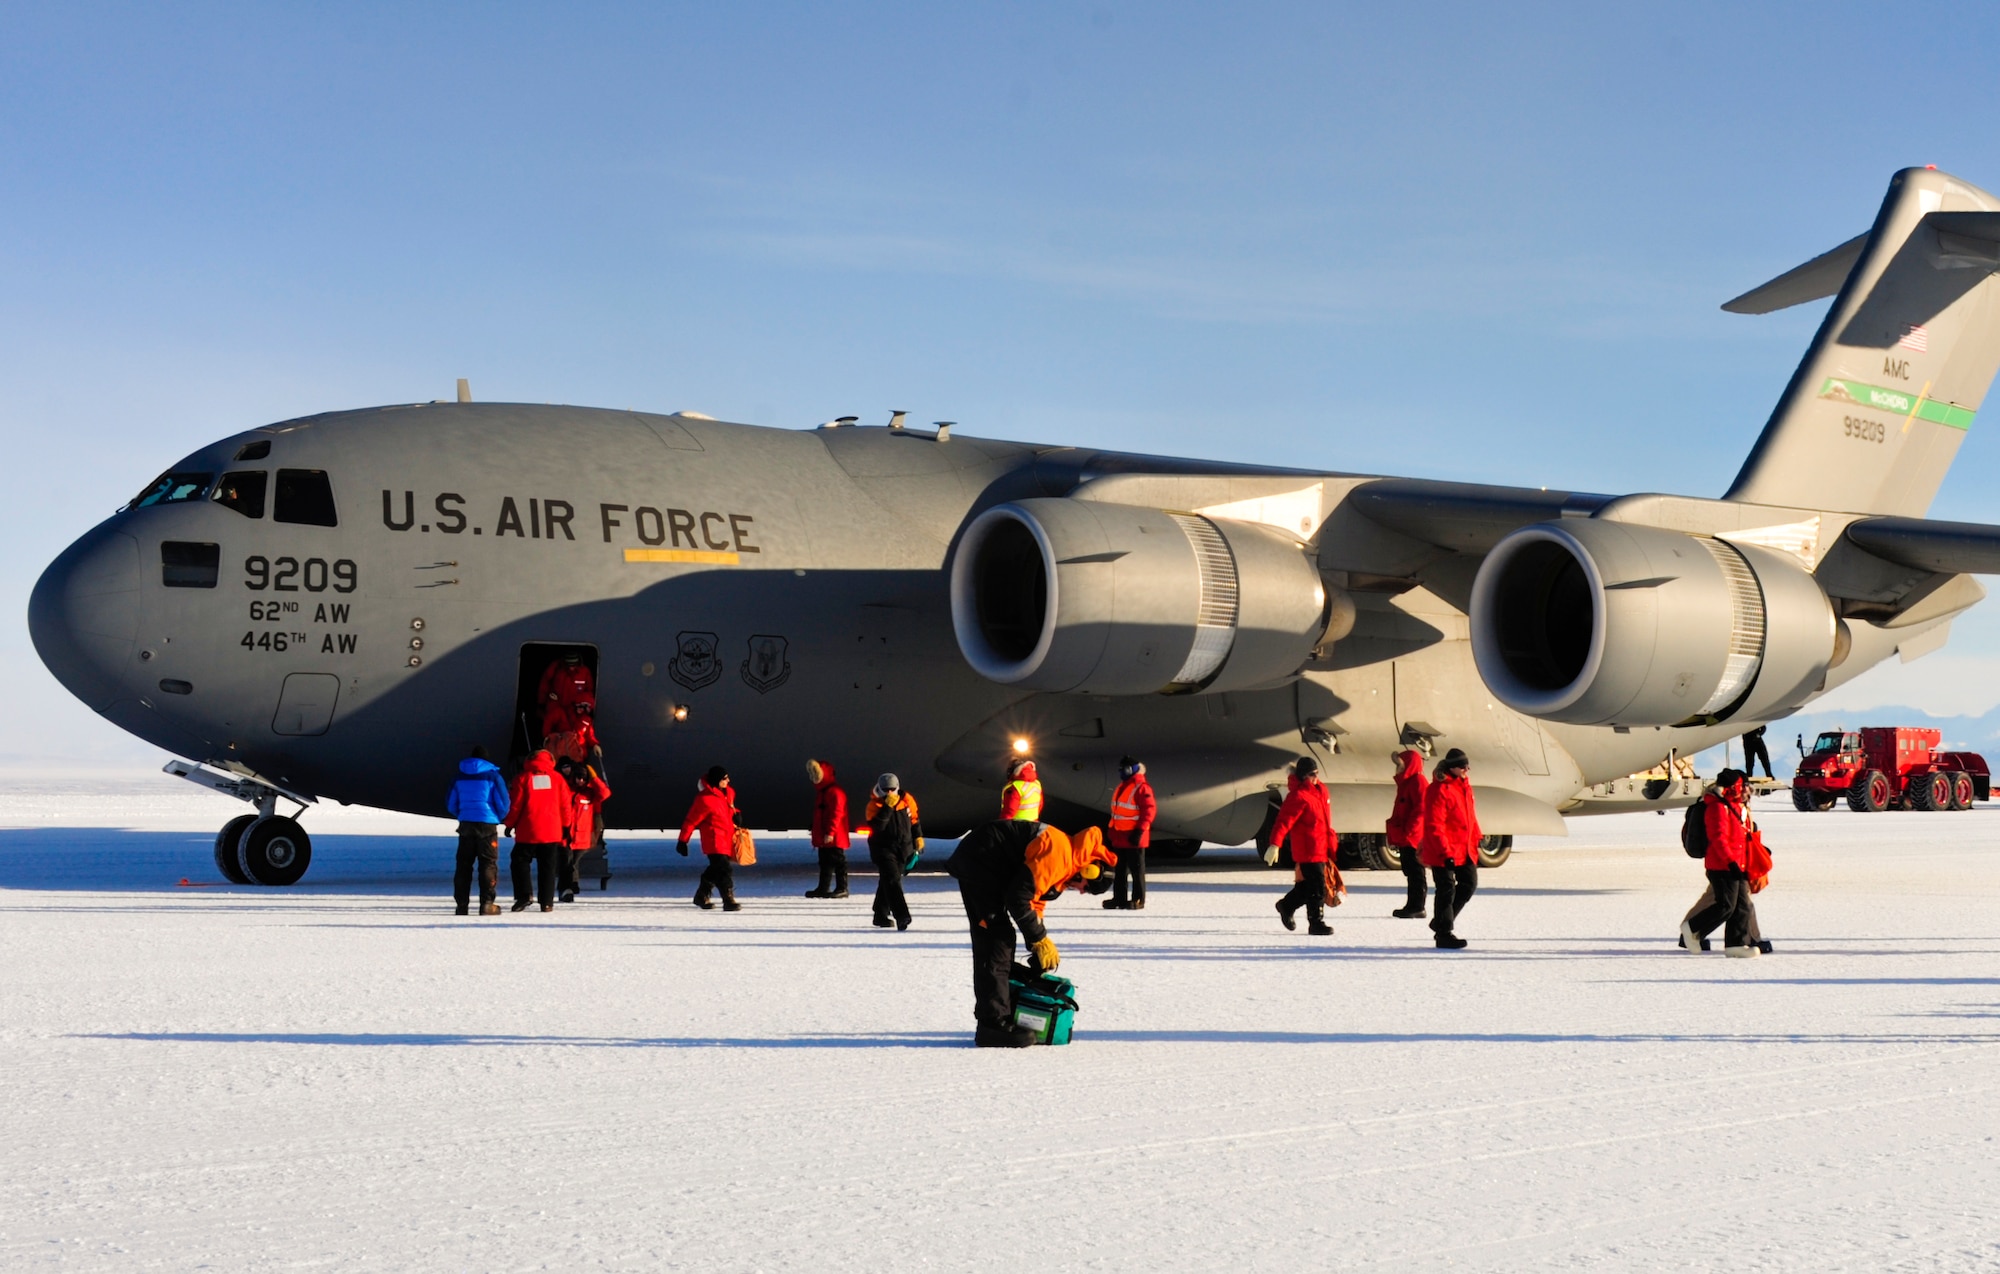 National Science Foundation personnel exit a C-17 Globemaster III aircraft, Oct. 1, 2012, at McMurdo Station, Antarctica. Every year, Airmen from the 62nd and 446th Airlift Wings at Joint Base Lewis-McChord deploy to transport cargo and personnel in support of the NSF and Operation Deep Freeze. (U.S. Air Force photo/Staff Sgt. Sean Tobin)